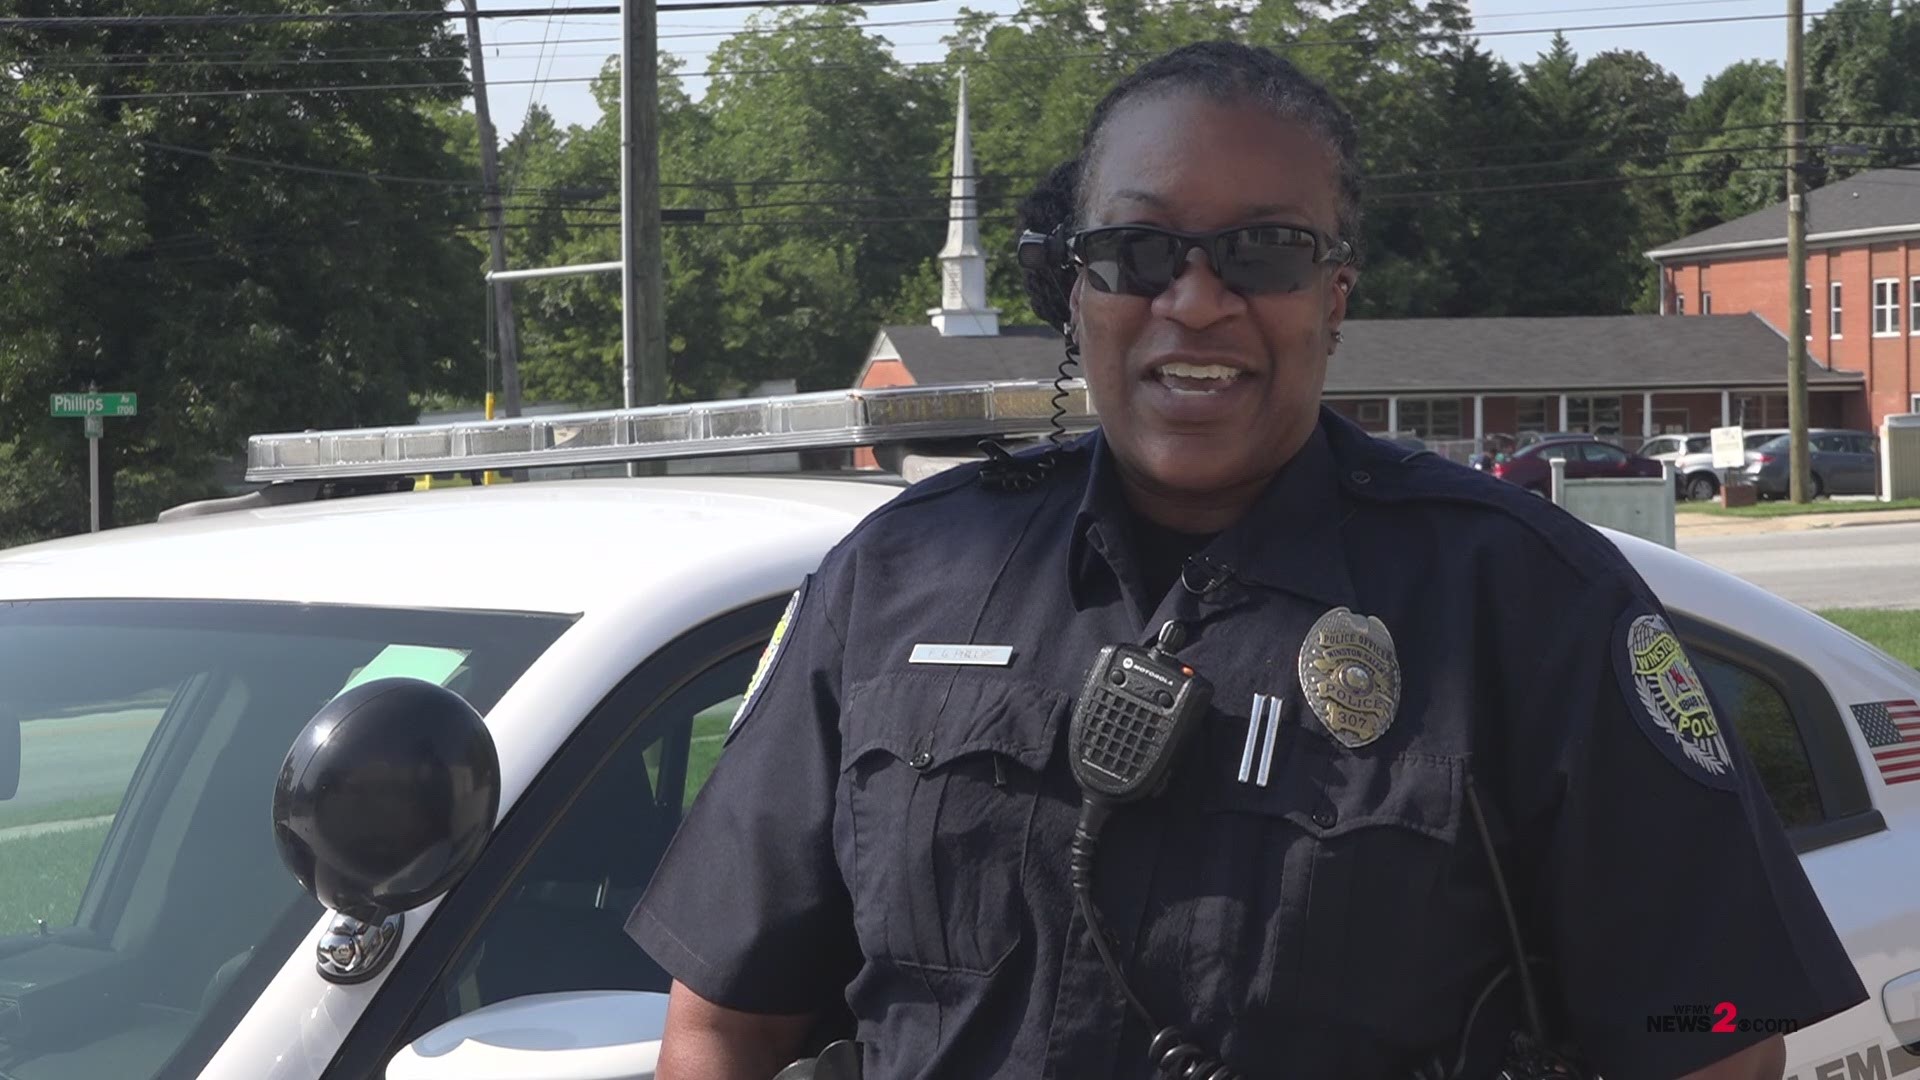 Winston-Salem Police Officer Flo Gregory Phillips sings the national anthem acapella style!